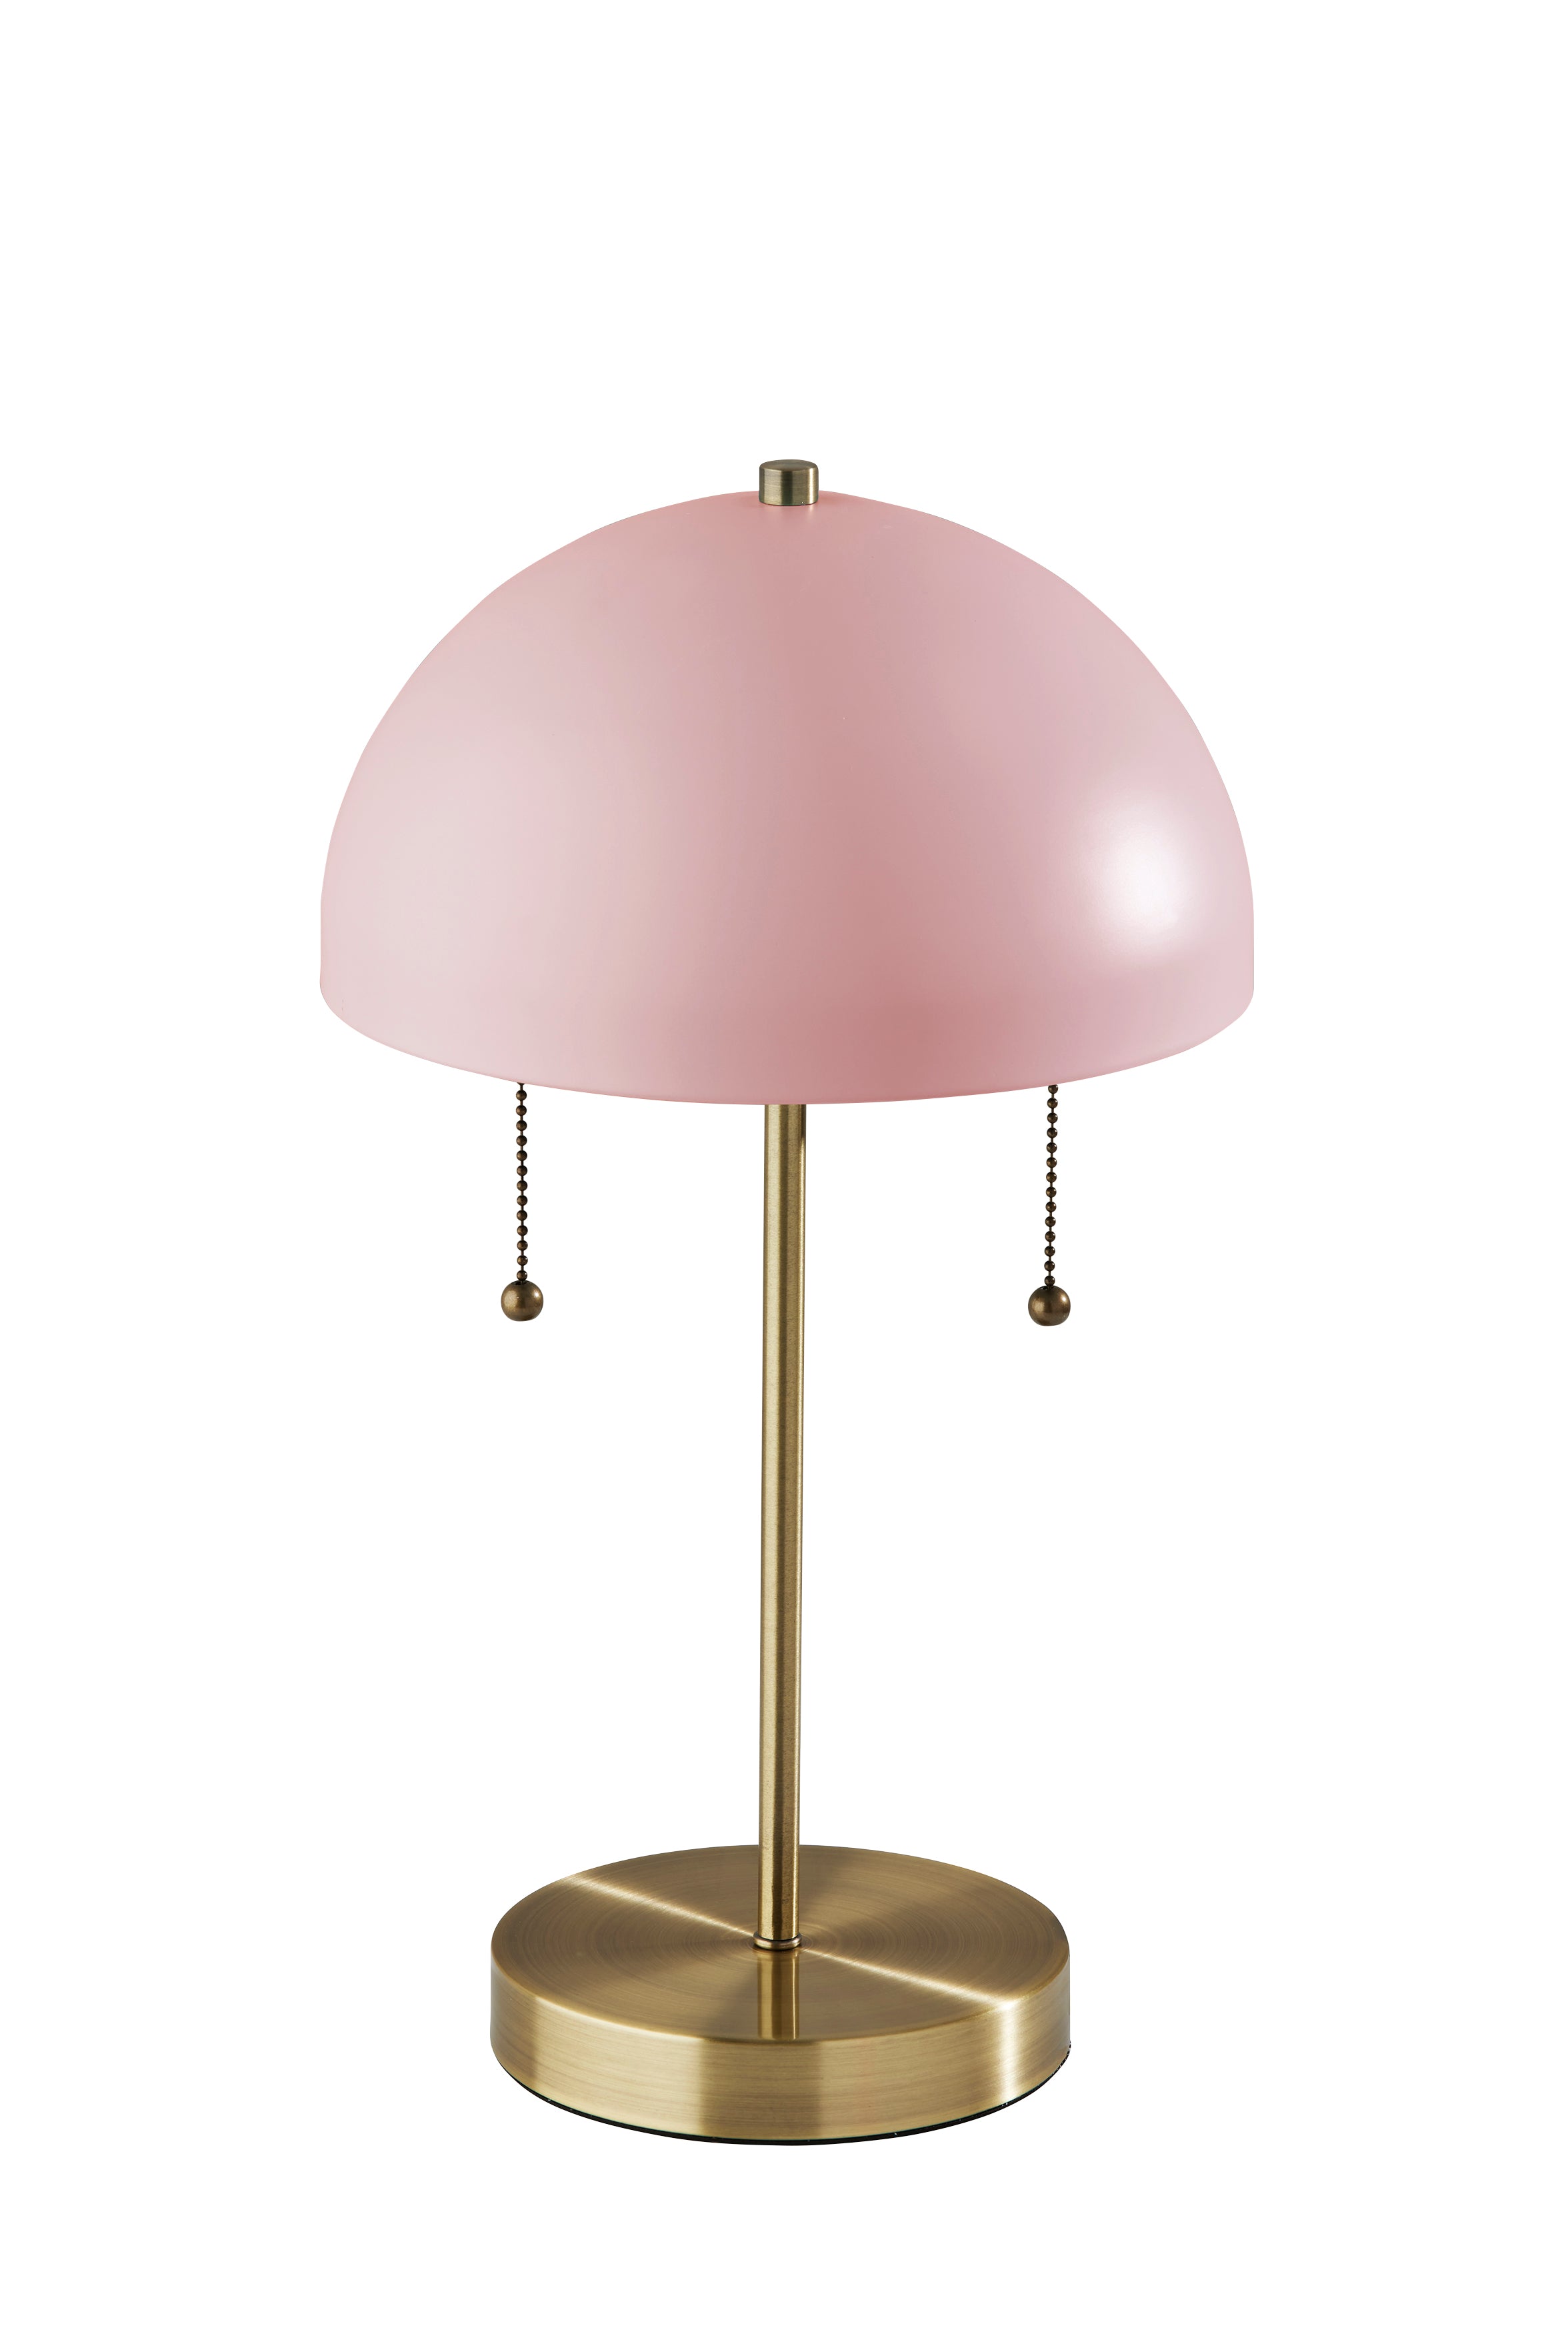 BOWIE Lampe sur table Or, Rose - 5132-29 | ADESSO